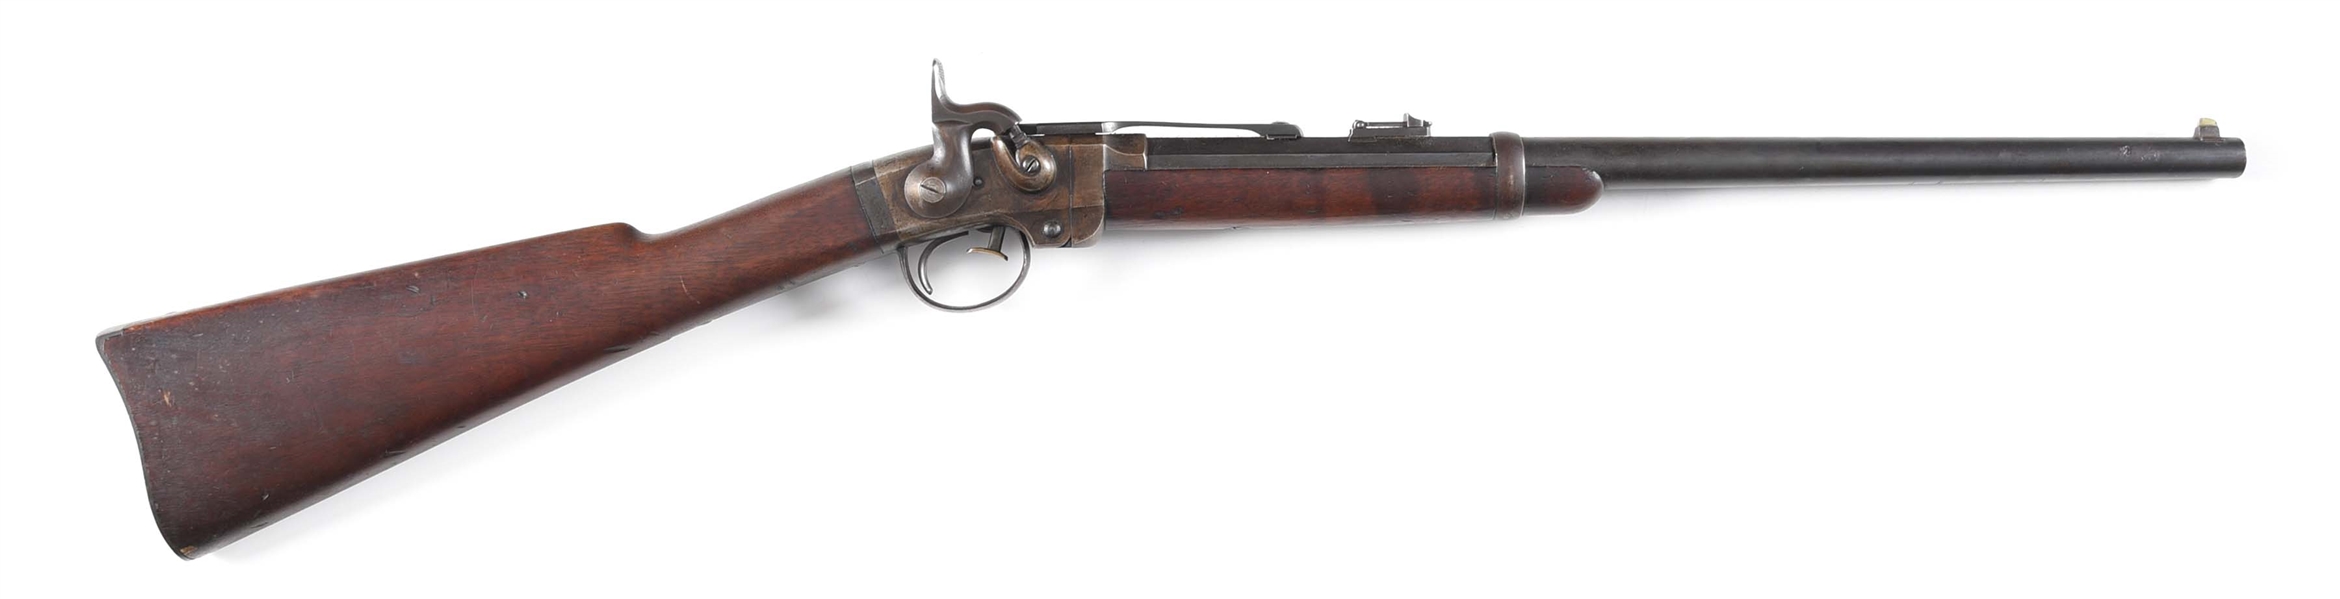 (A) AMERICAN MACHINE WORKS MANUFACTURED SMITH CARBINE.